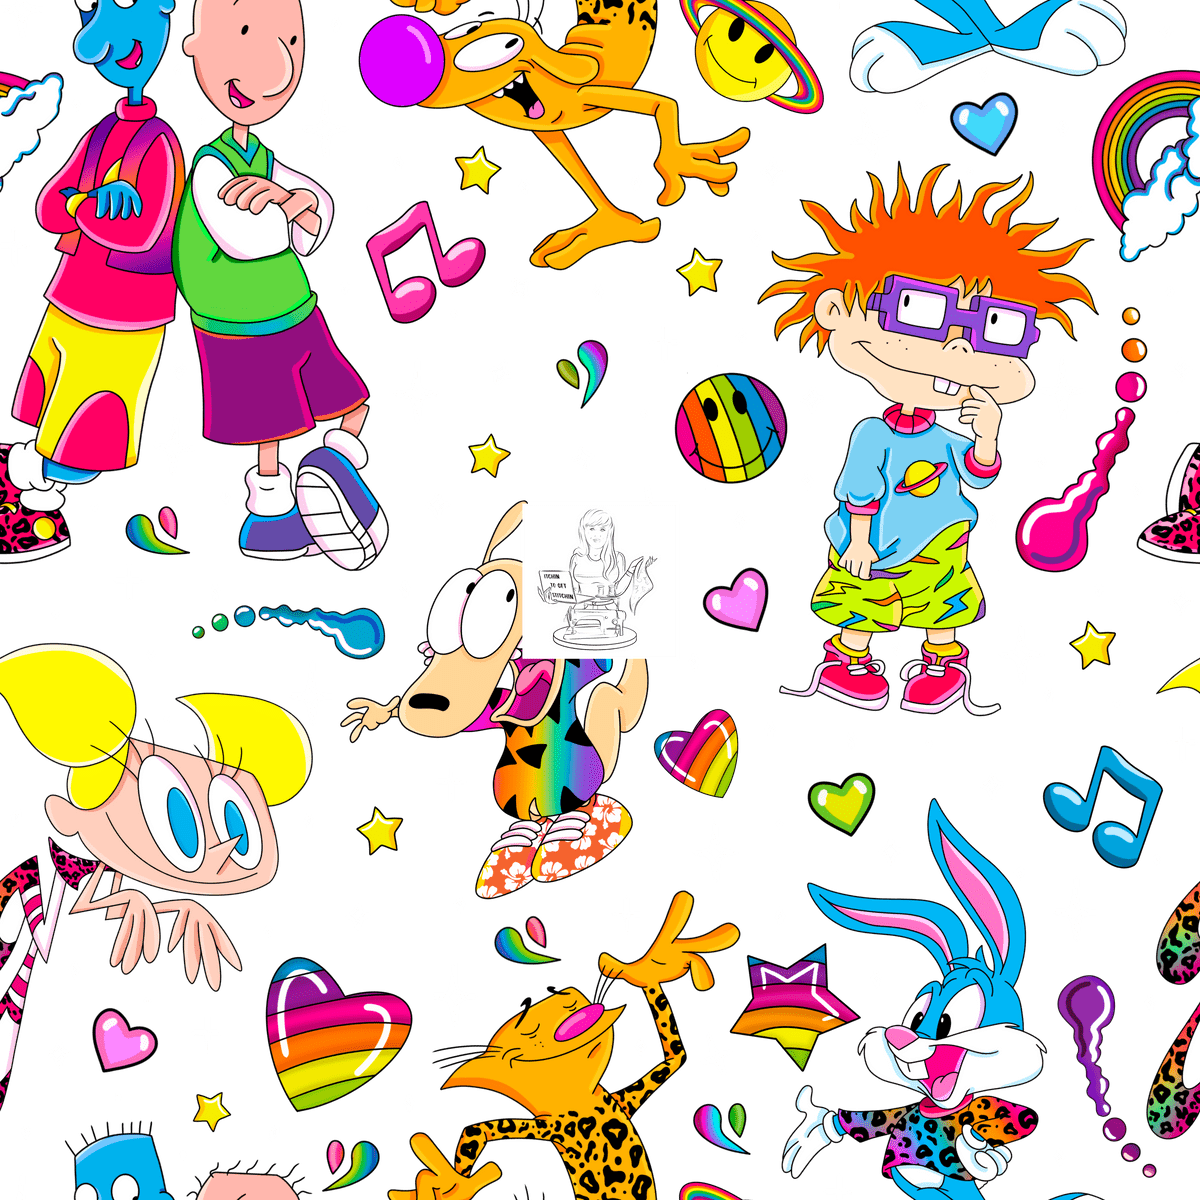 A pattern of the characters from the 90s Nickelodeon show Rocko's Modern Life. - Rugrats